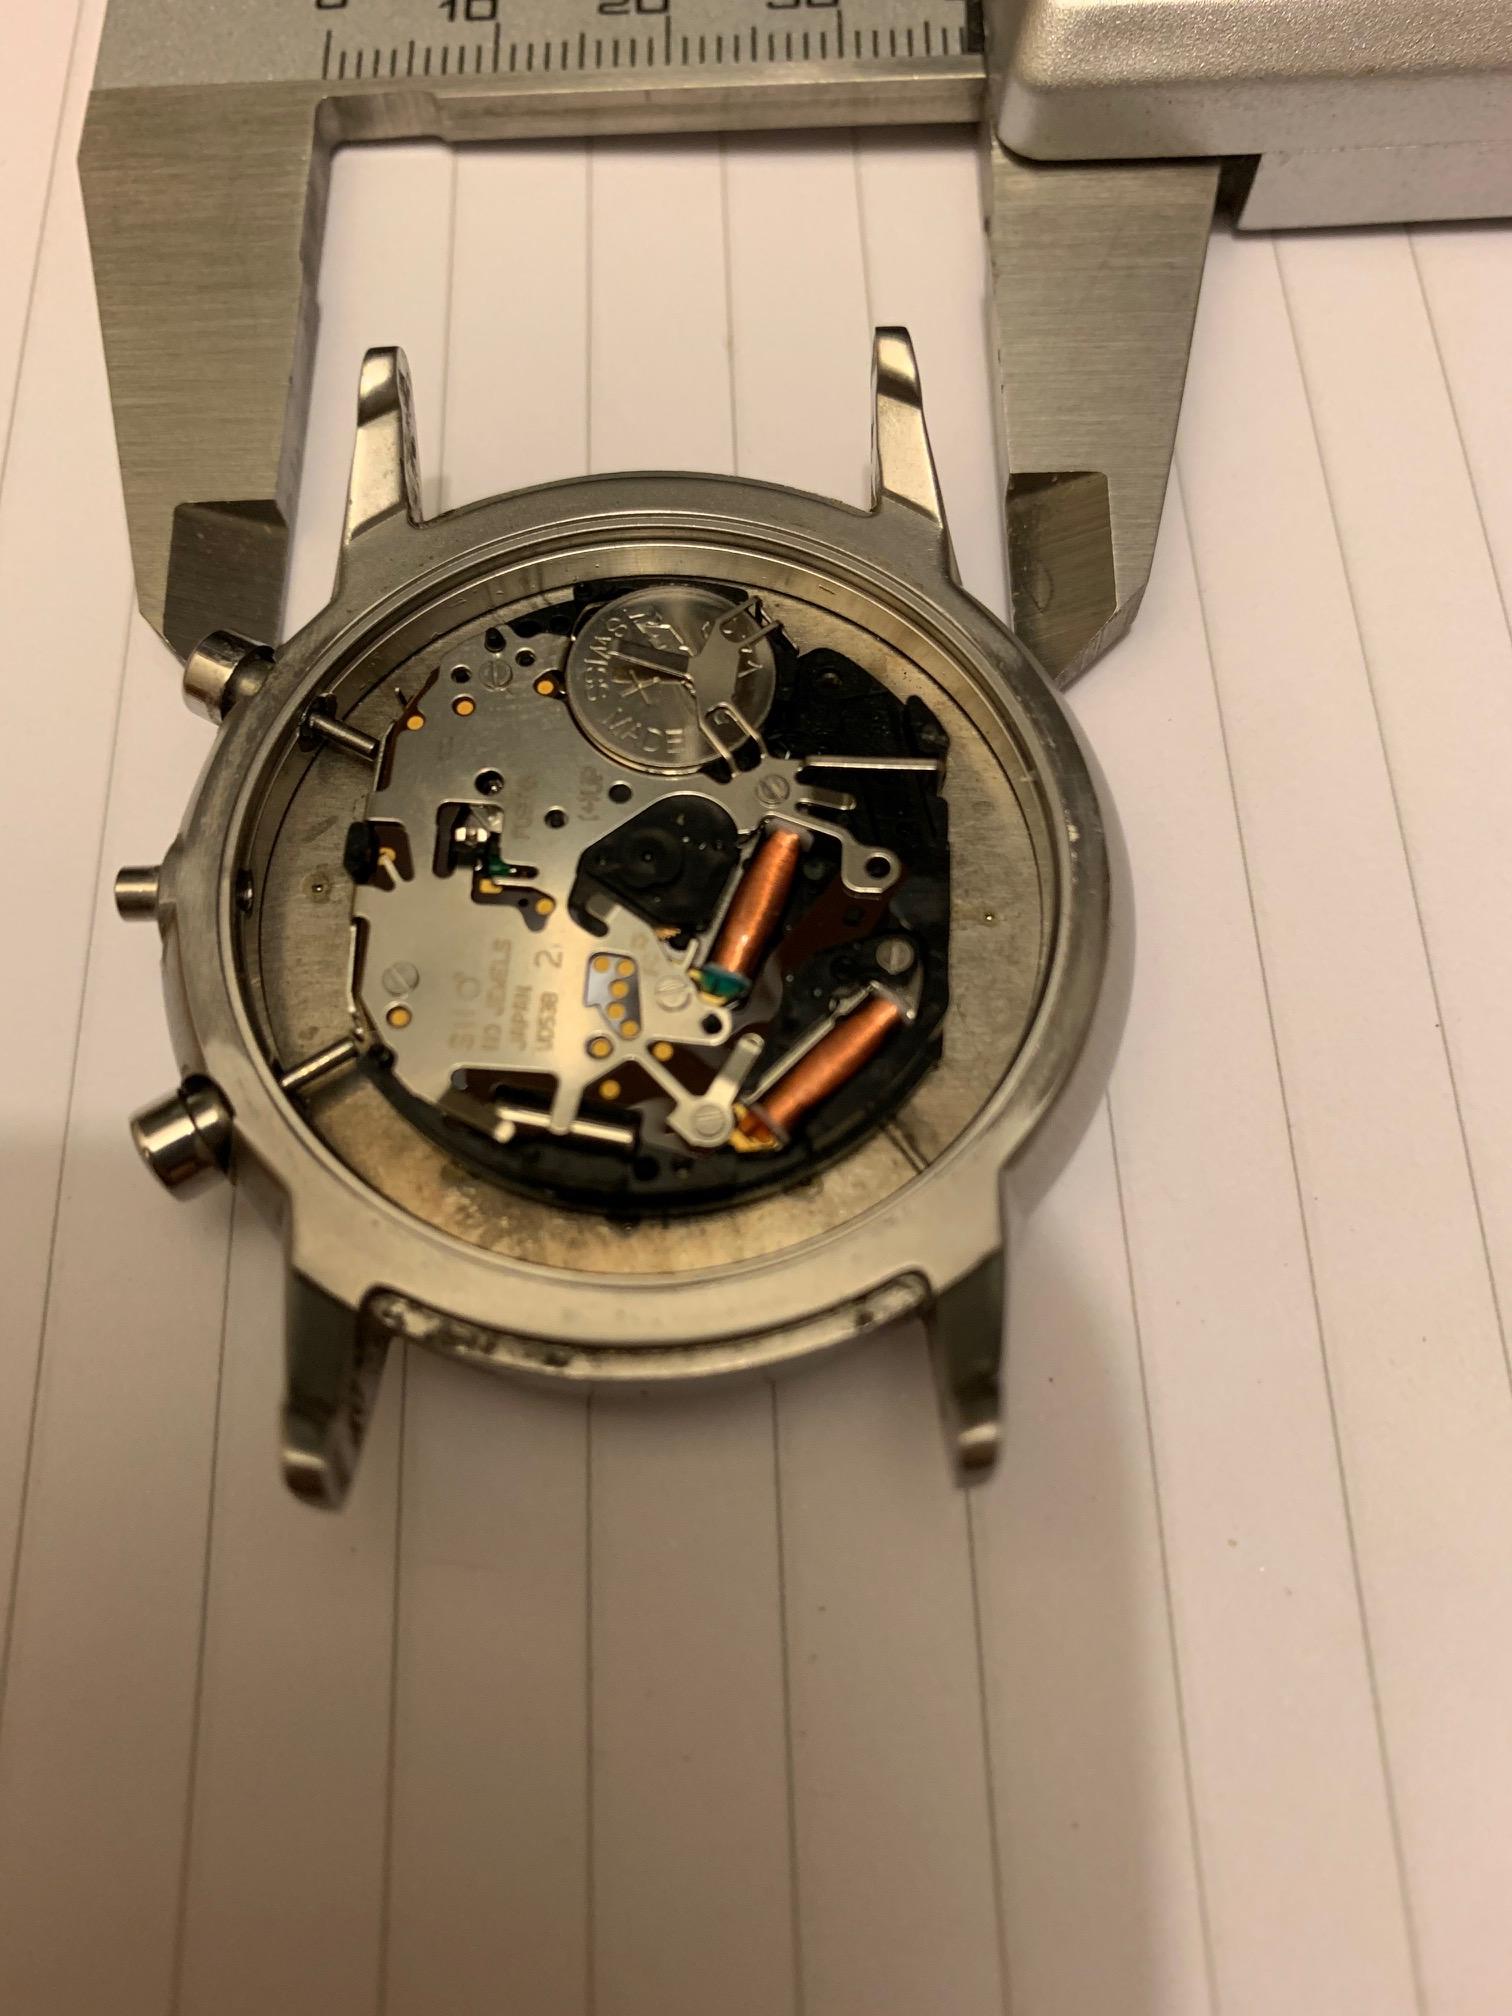 How to remove watch face of Armani AR-2432 - Watch Repairs Help & Advice - Watch  Repair Talk